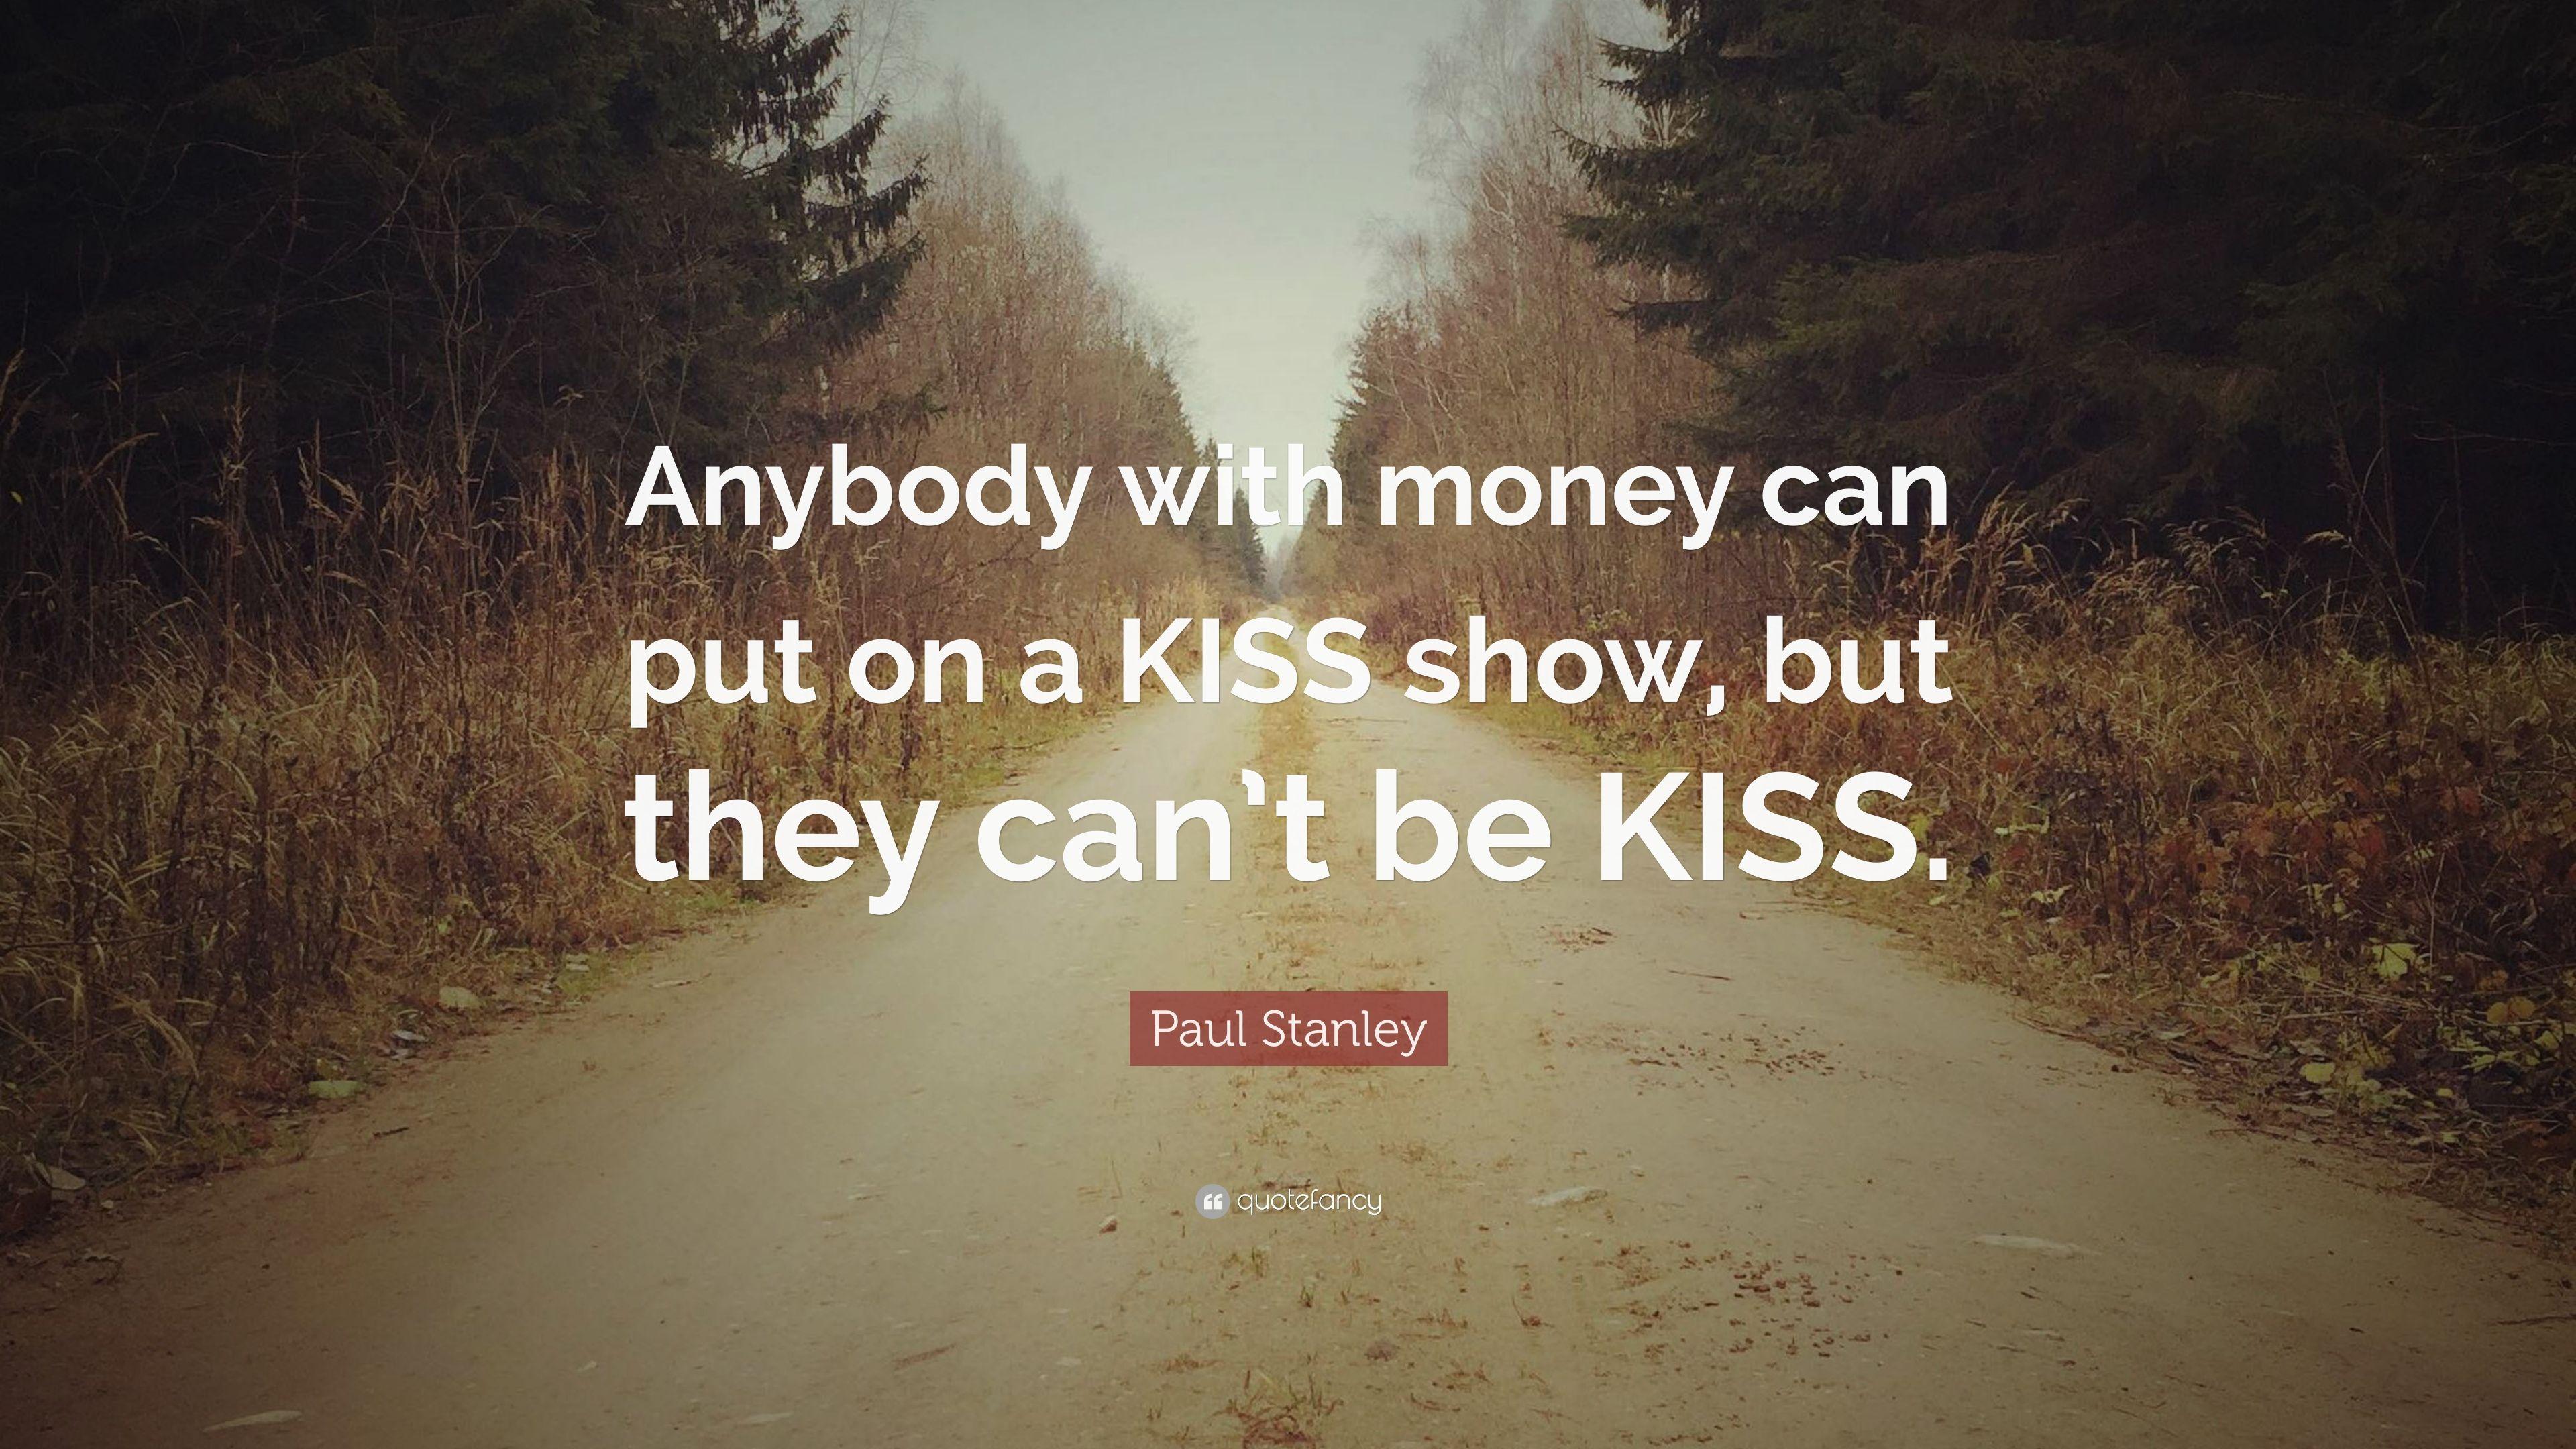 Paul Stanley Quote: “Anybody with money can put on a KISS show